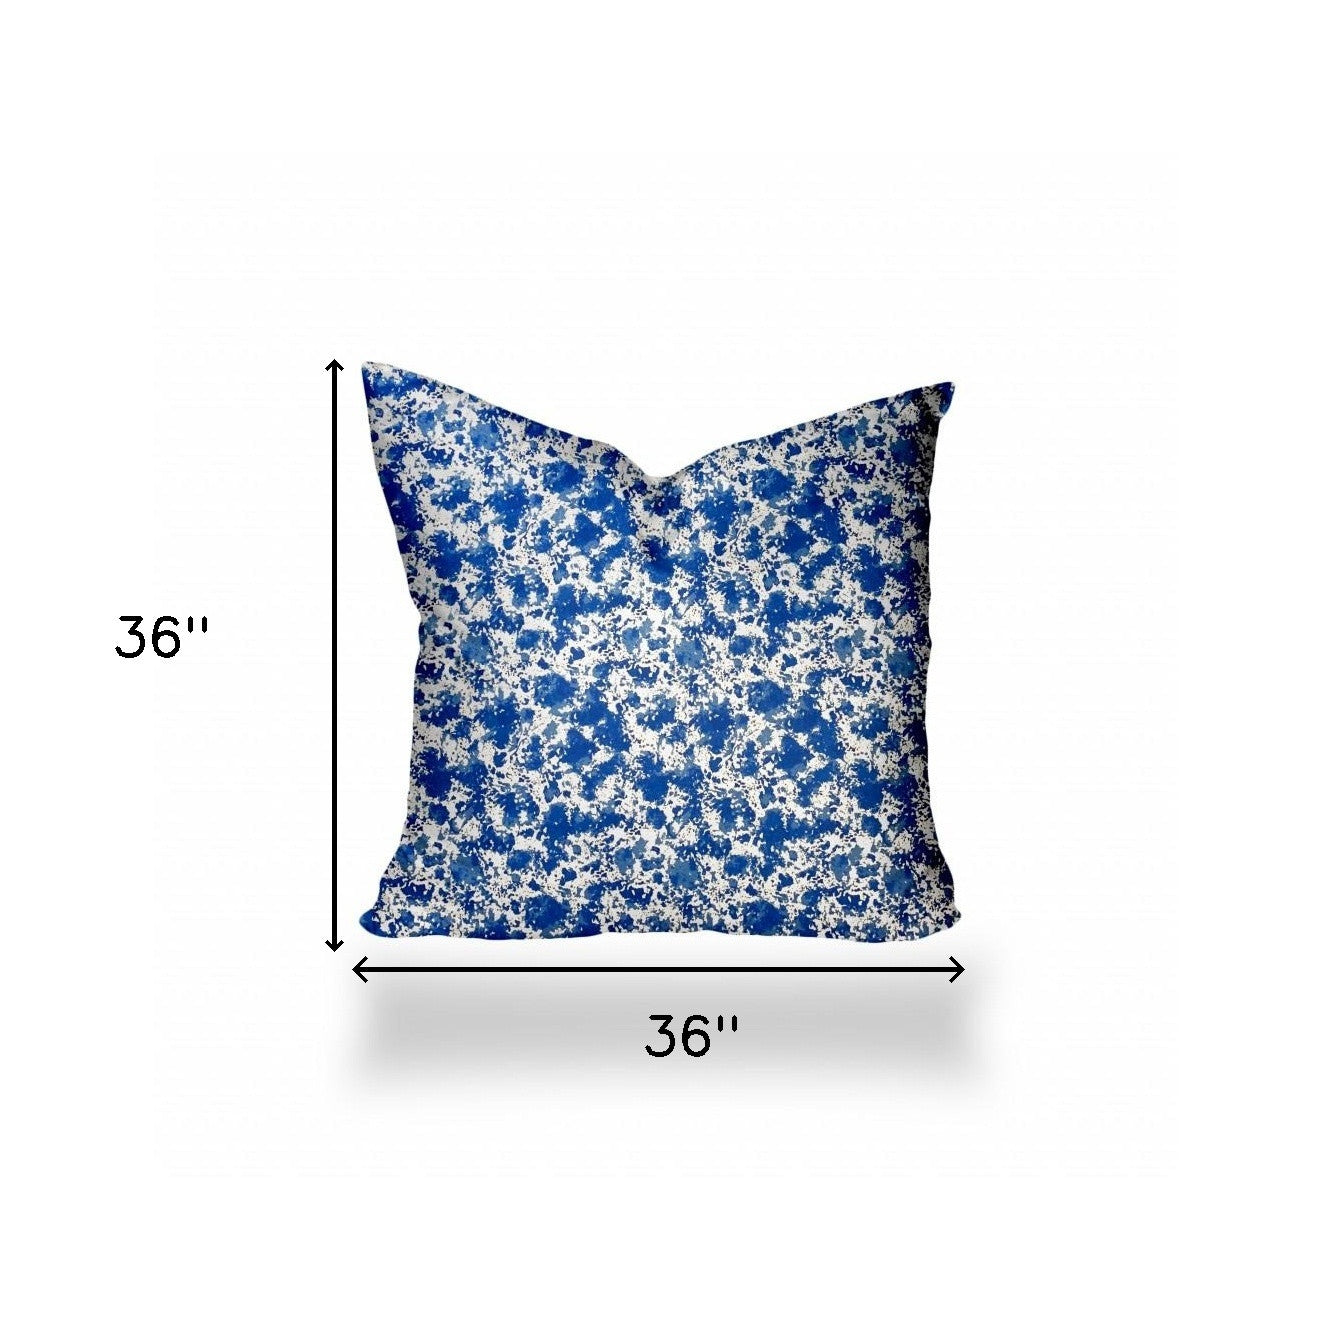 36" X 36" Blue And White Zippered Coastal Throw Indoor Outdoor Pillow